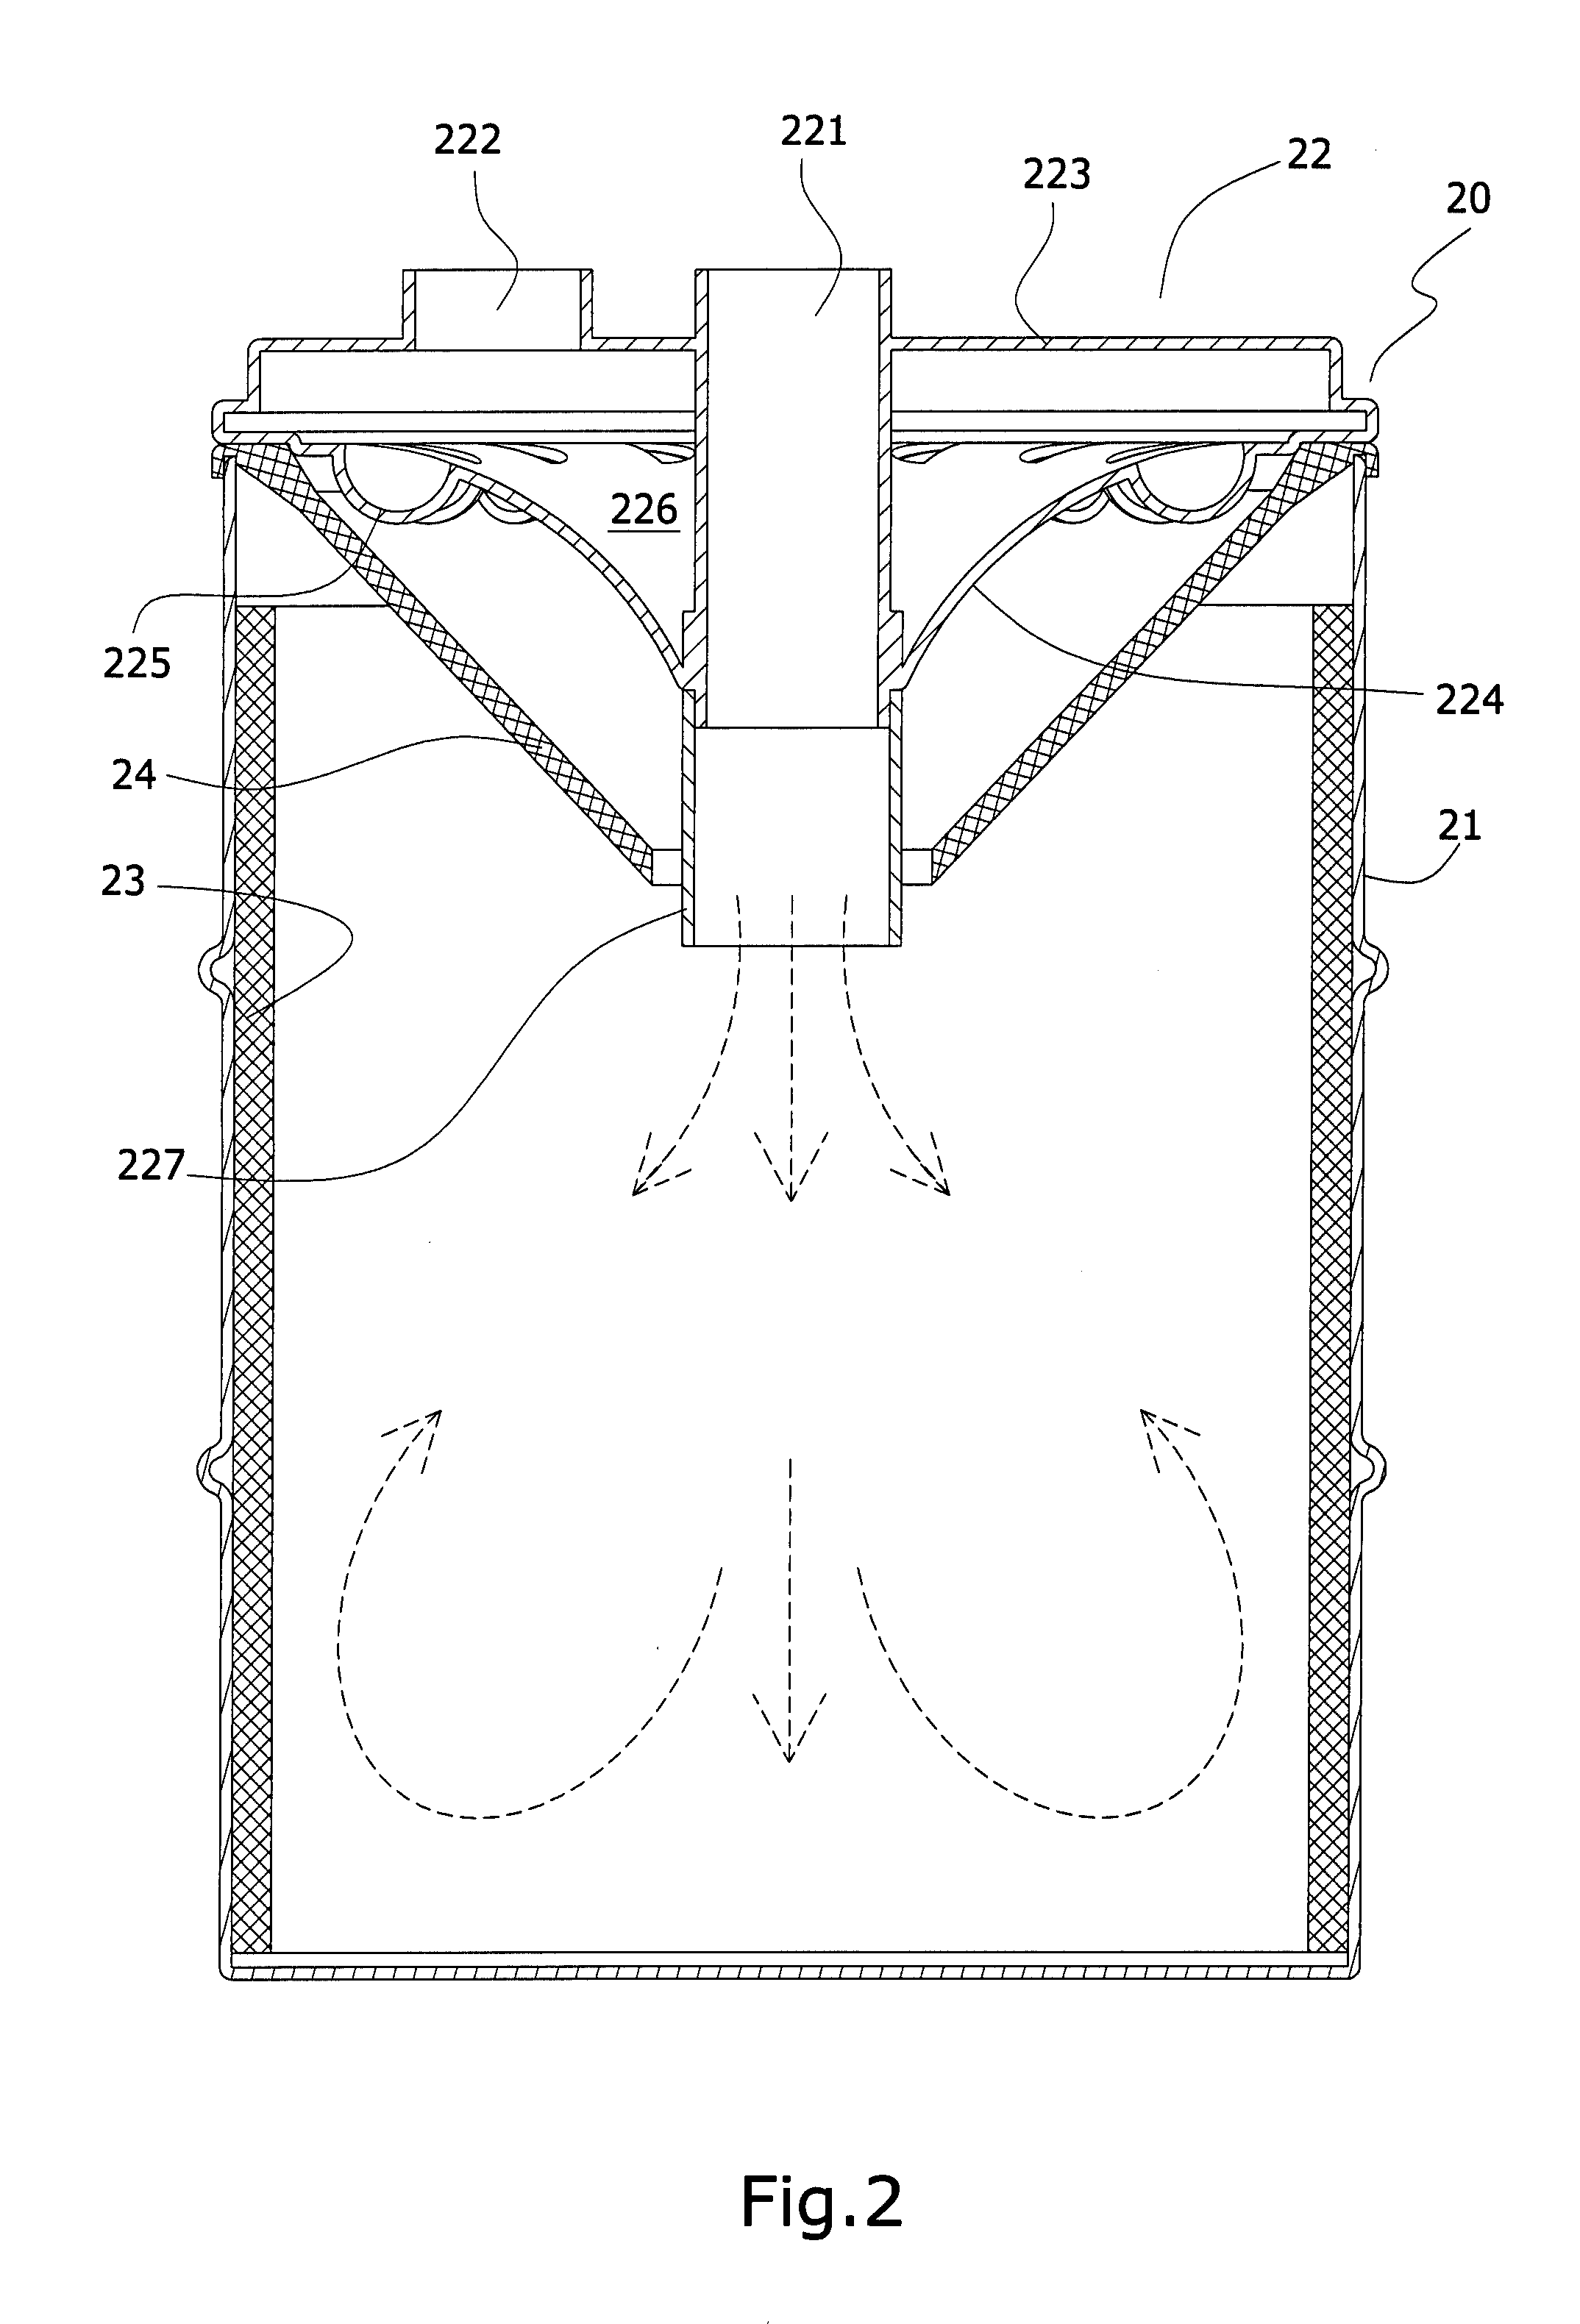 Structure of an impurities collecting bucket for an air separator and purifier